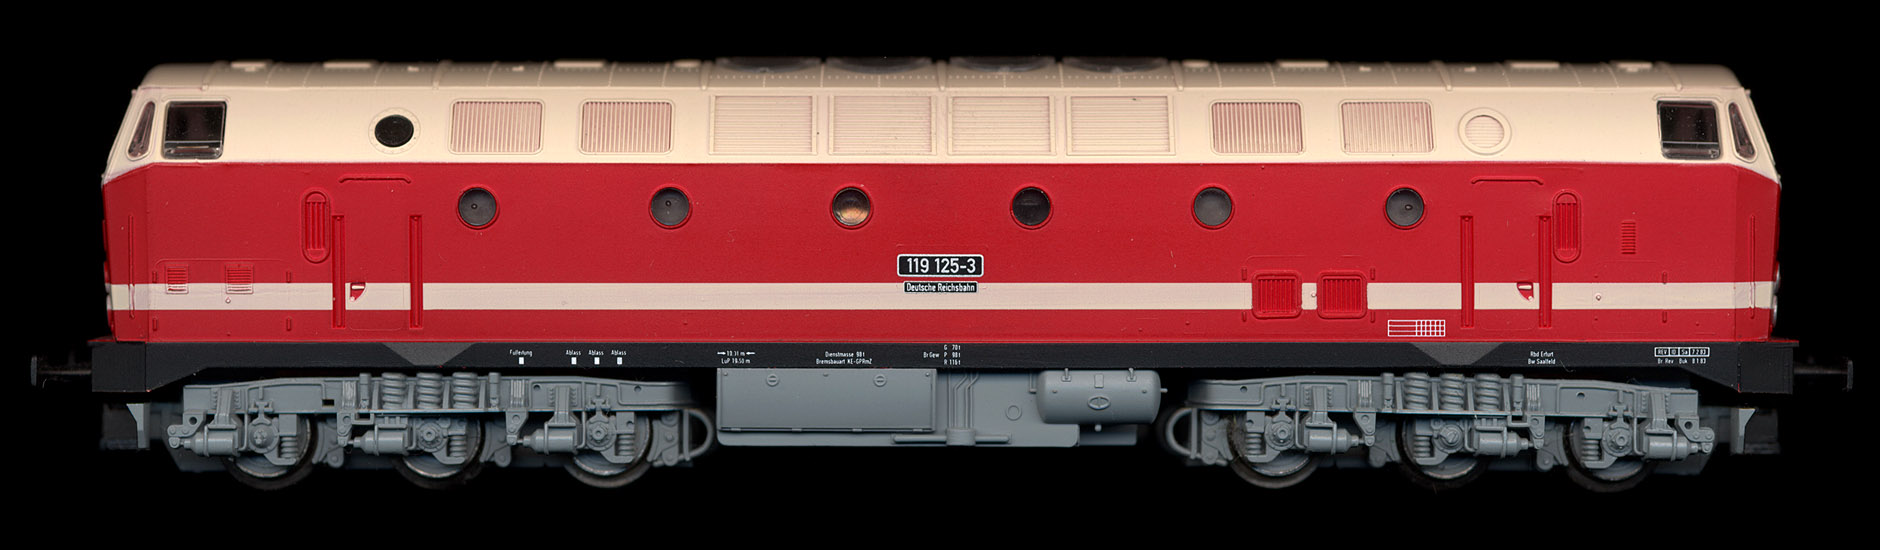 BR 119 125-3